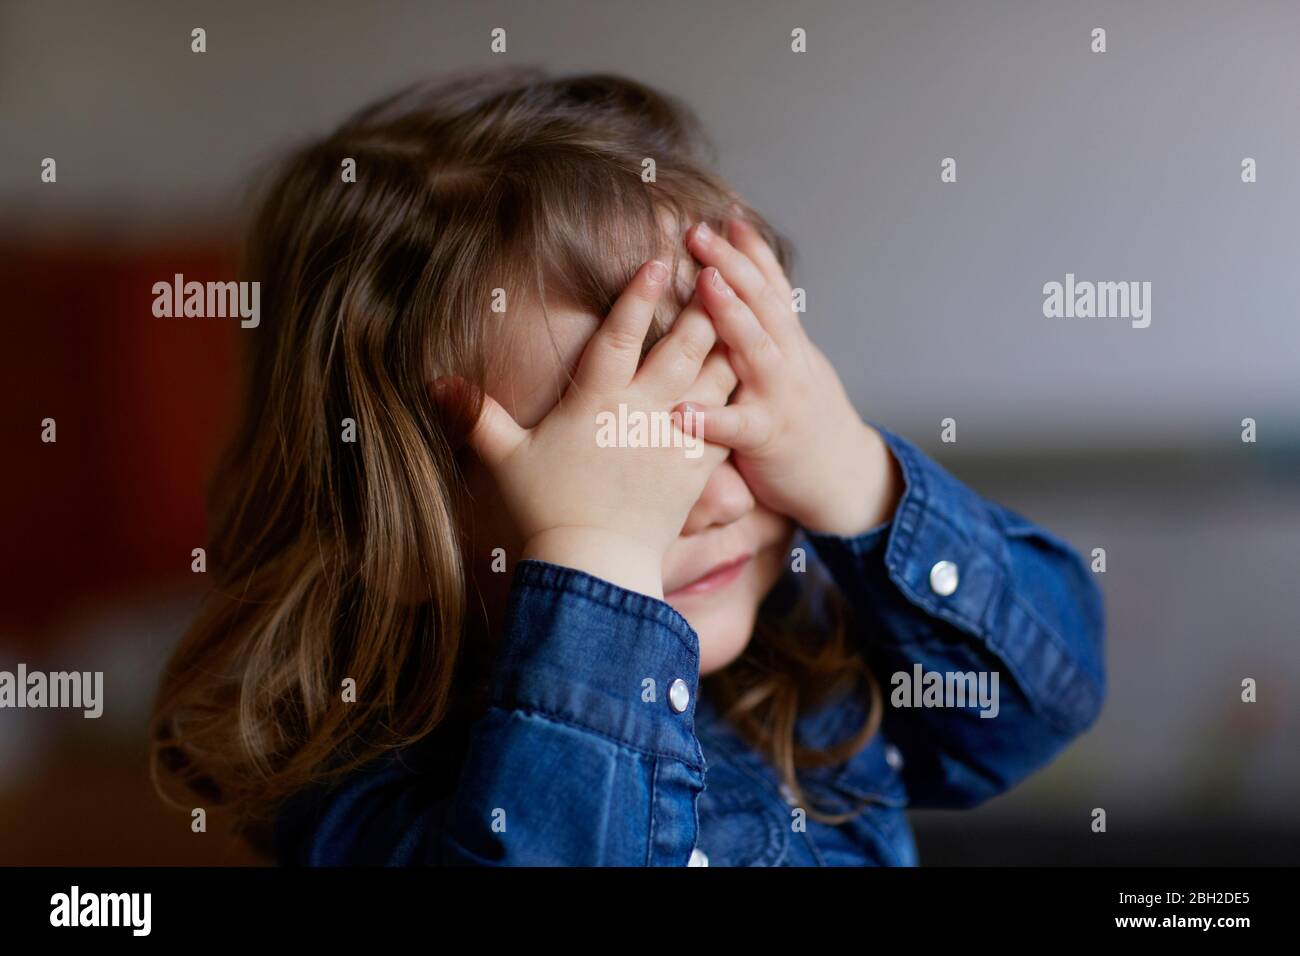 Portrait of toddler girl covering eyes with her hands Stock Photo